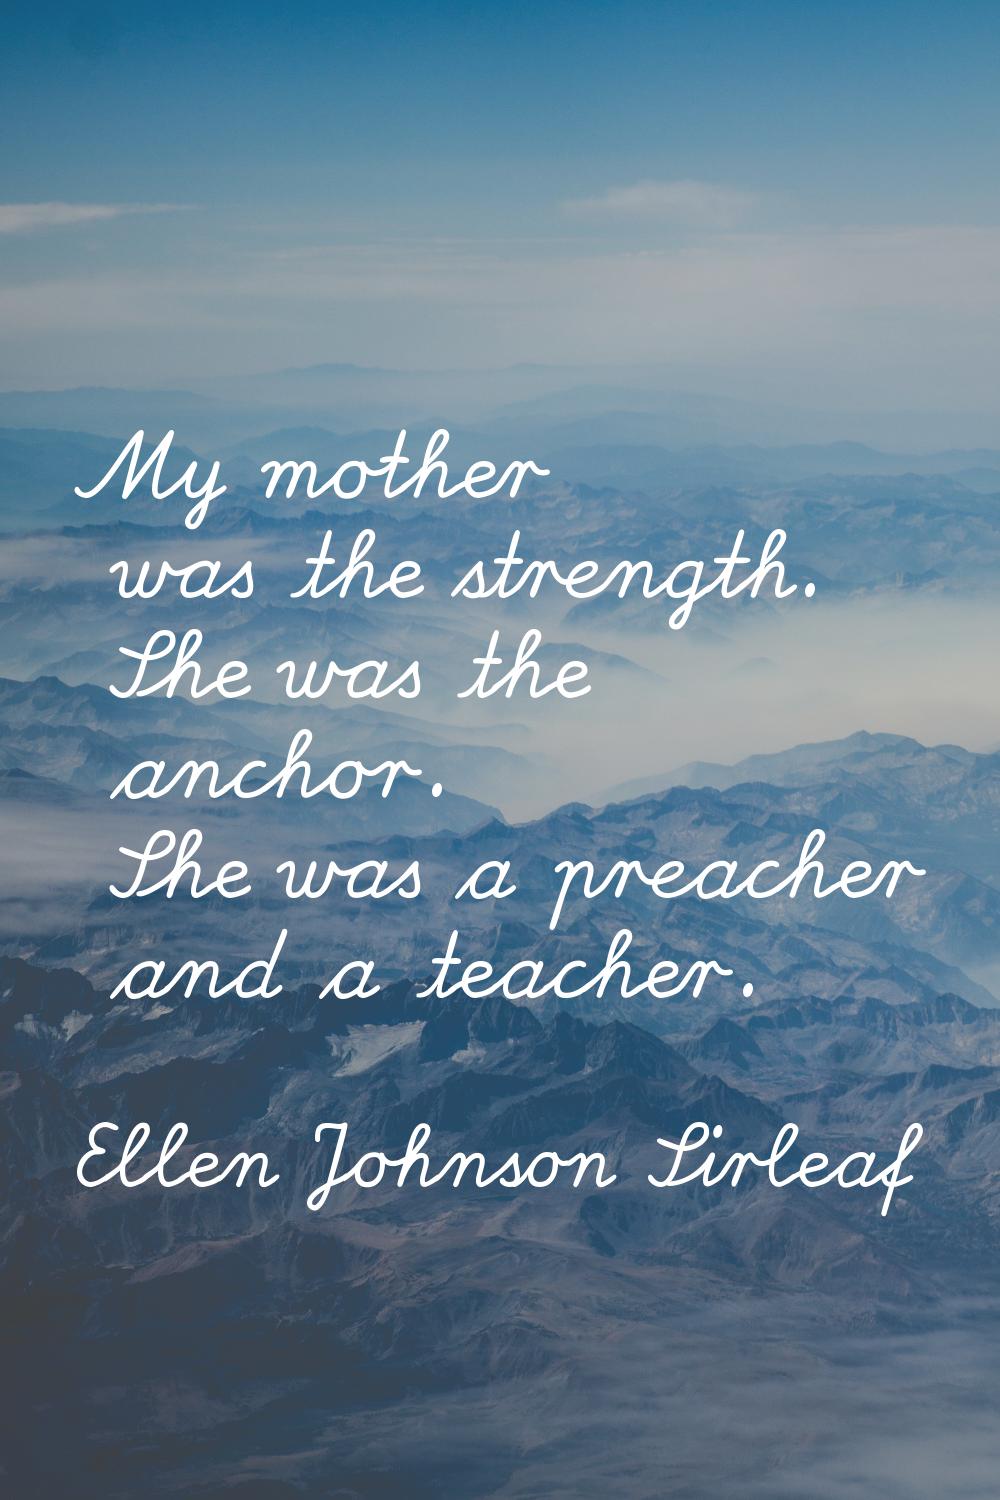 My mother was the strength. She was the anchor. She was a preacher and a teacher.